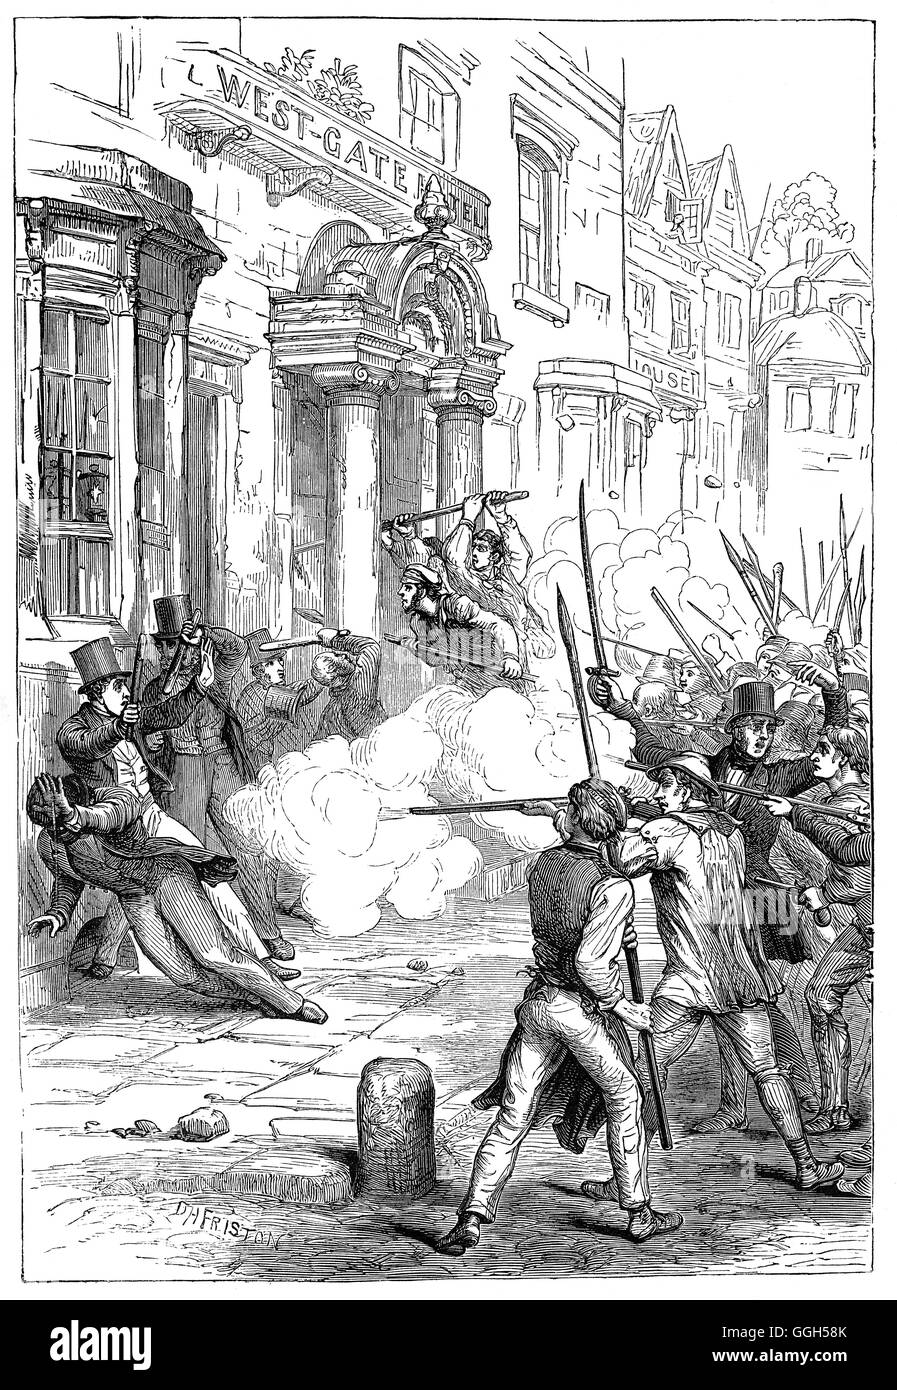 The Newport Rising was the last large-scale armed rebellion against authority in Great Britain, and one of the largest civil massacres committed by the British government in the 19th century.  On 4 November 1839, almost 10,000 Chartist sympathisers, including many coal-miners to liberate fellow Chartists who were reported to have been taken prisoner in the Westgate Hotel in Newport, Monmouth. About 22 of the unarmed demonstrators were killed when troops opened fire on them. The leaders of the rebellion were sentenced to a traitor's death, later commuted to transportation for life. Stock Photo